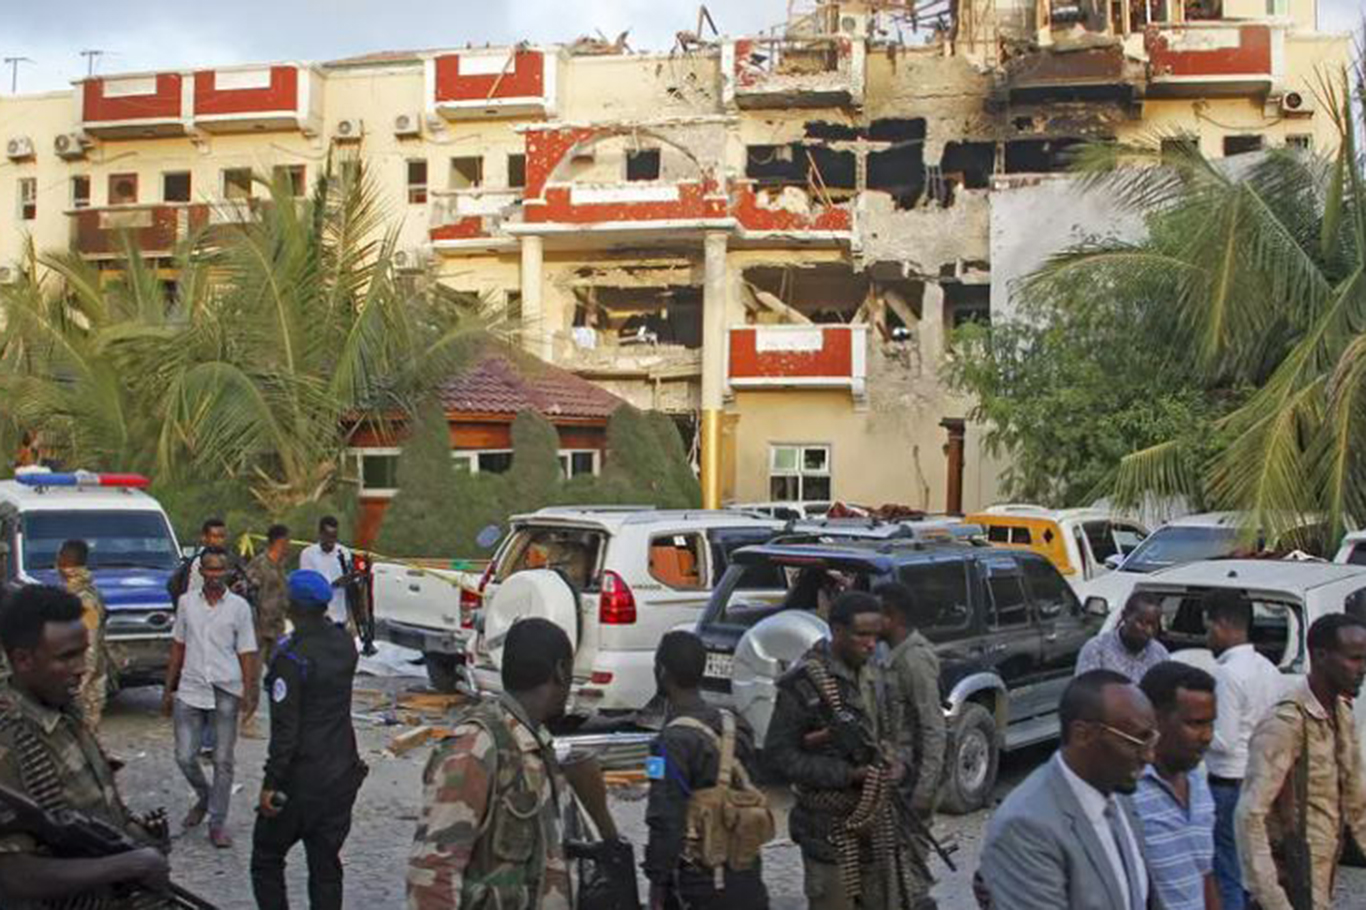 At least 5 killed as gunmen attack hotel in the Somali capital